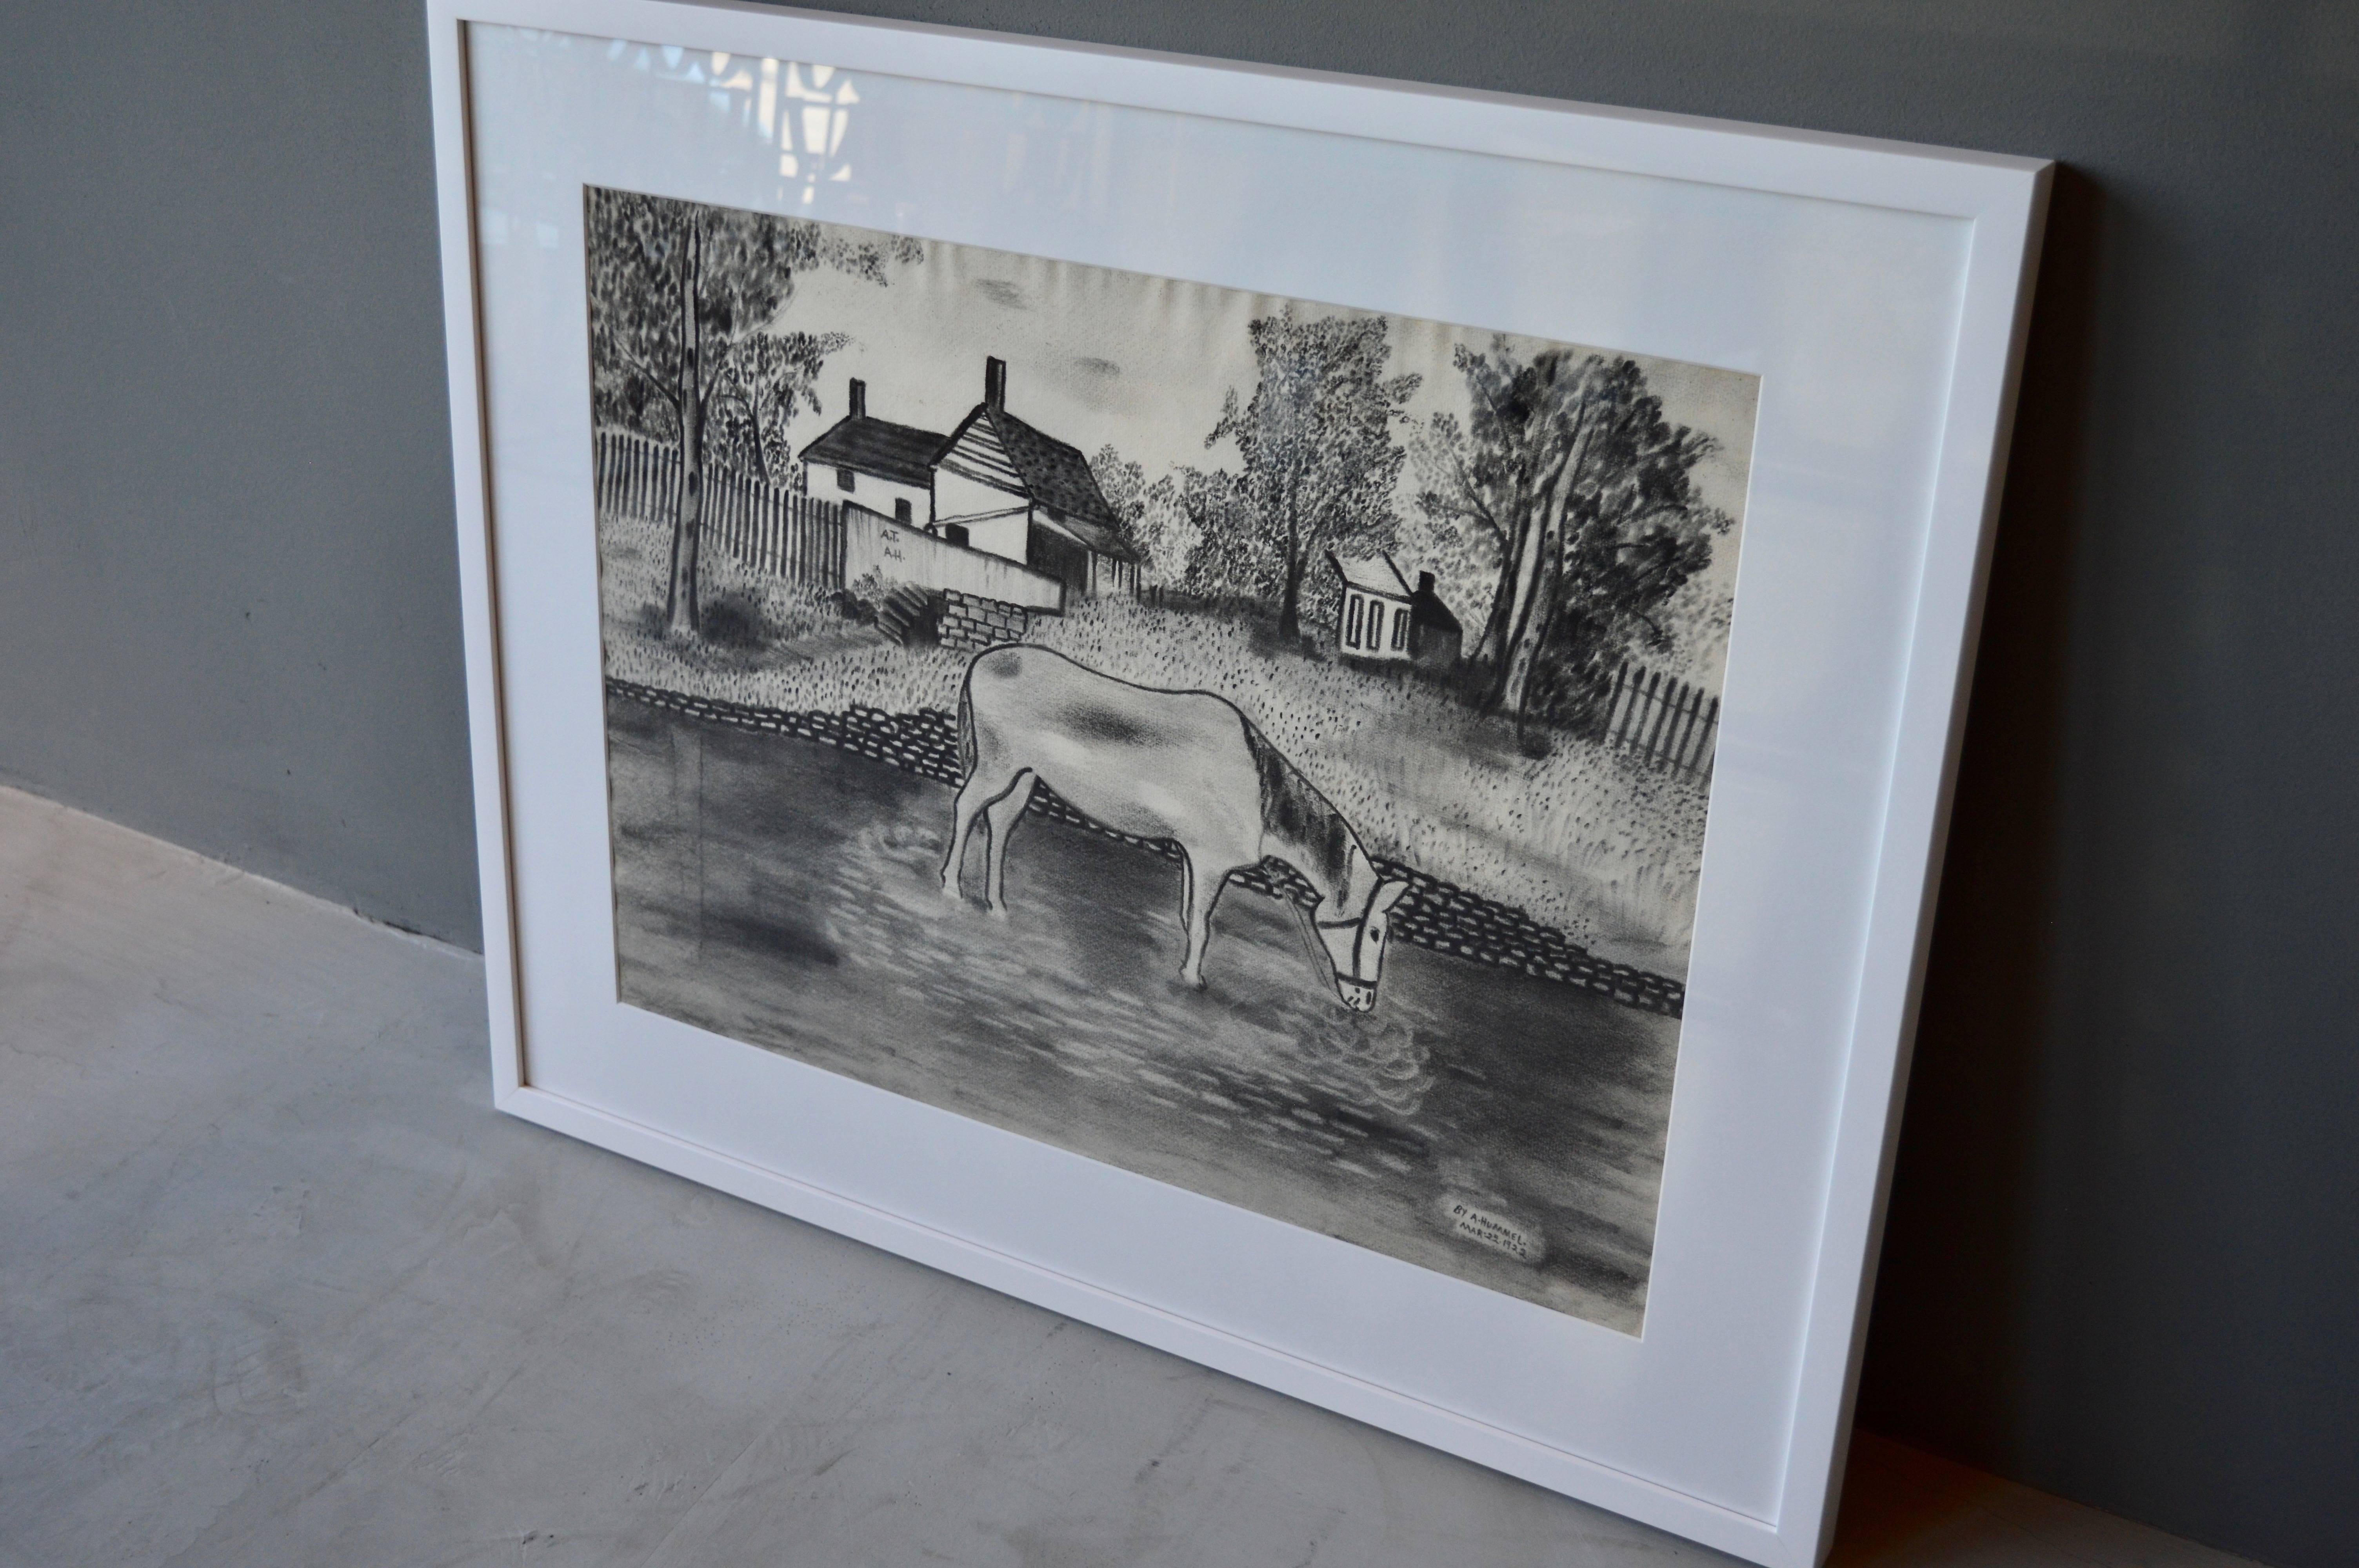 Quaint Folk Art charcoal drawing dated 1922. Farm scene with grazing horse and buildings and trees in background. Excellent vintage condition. Newly framed.